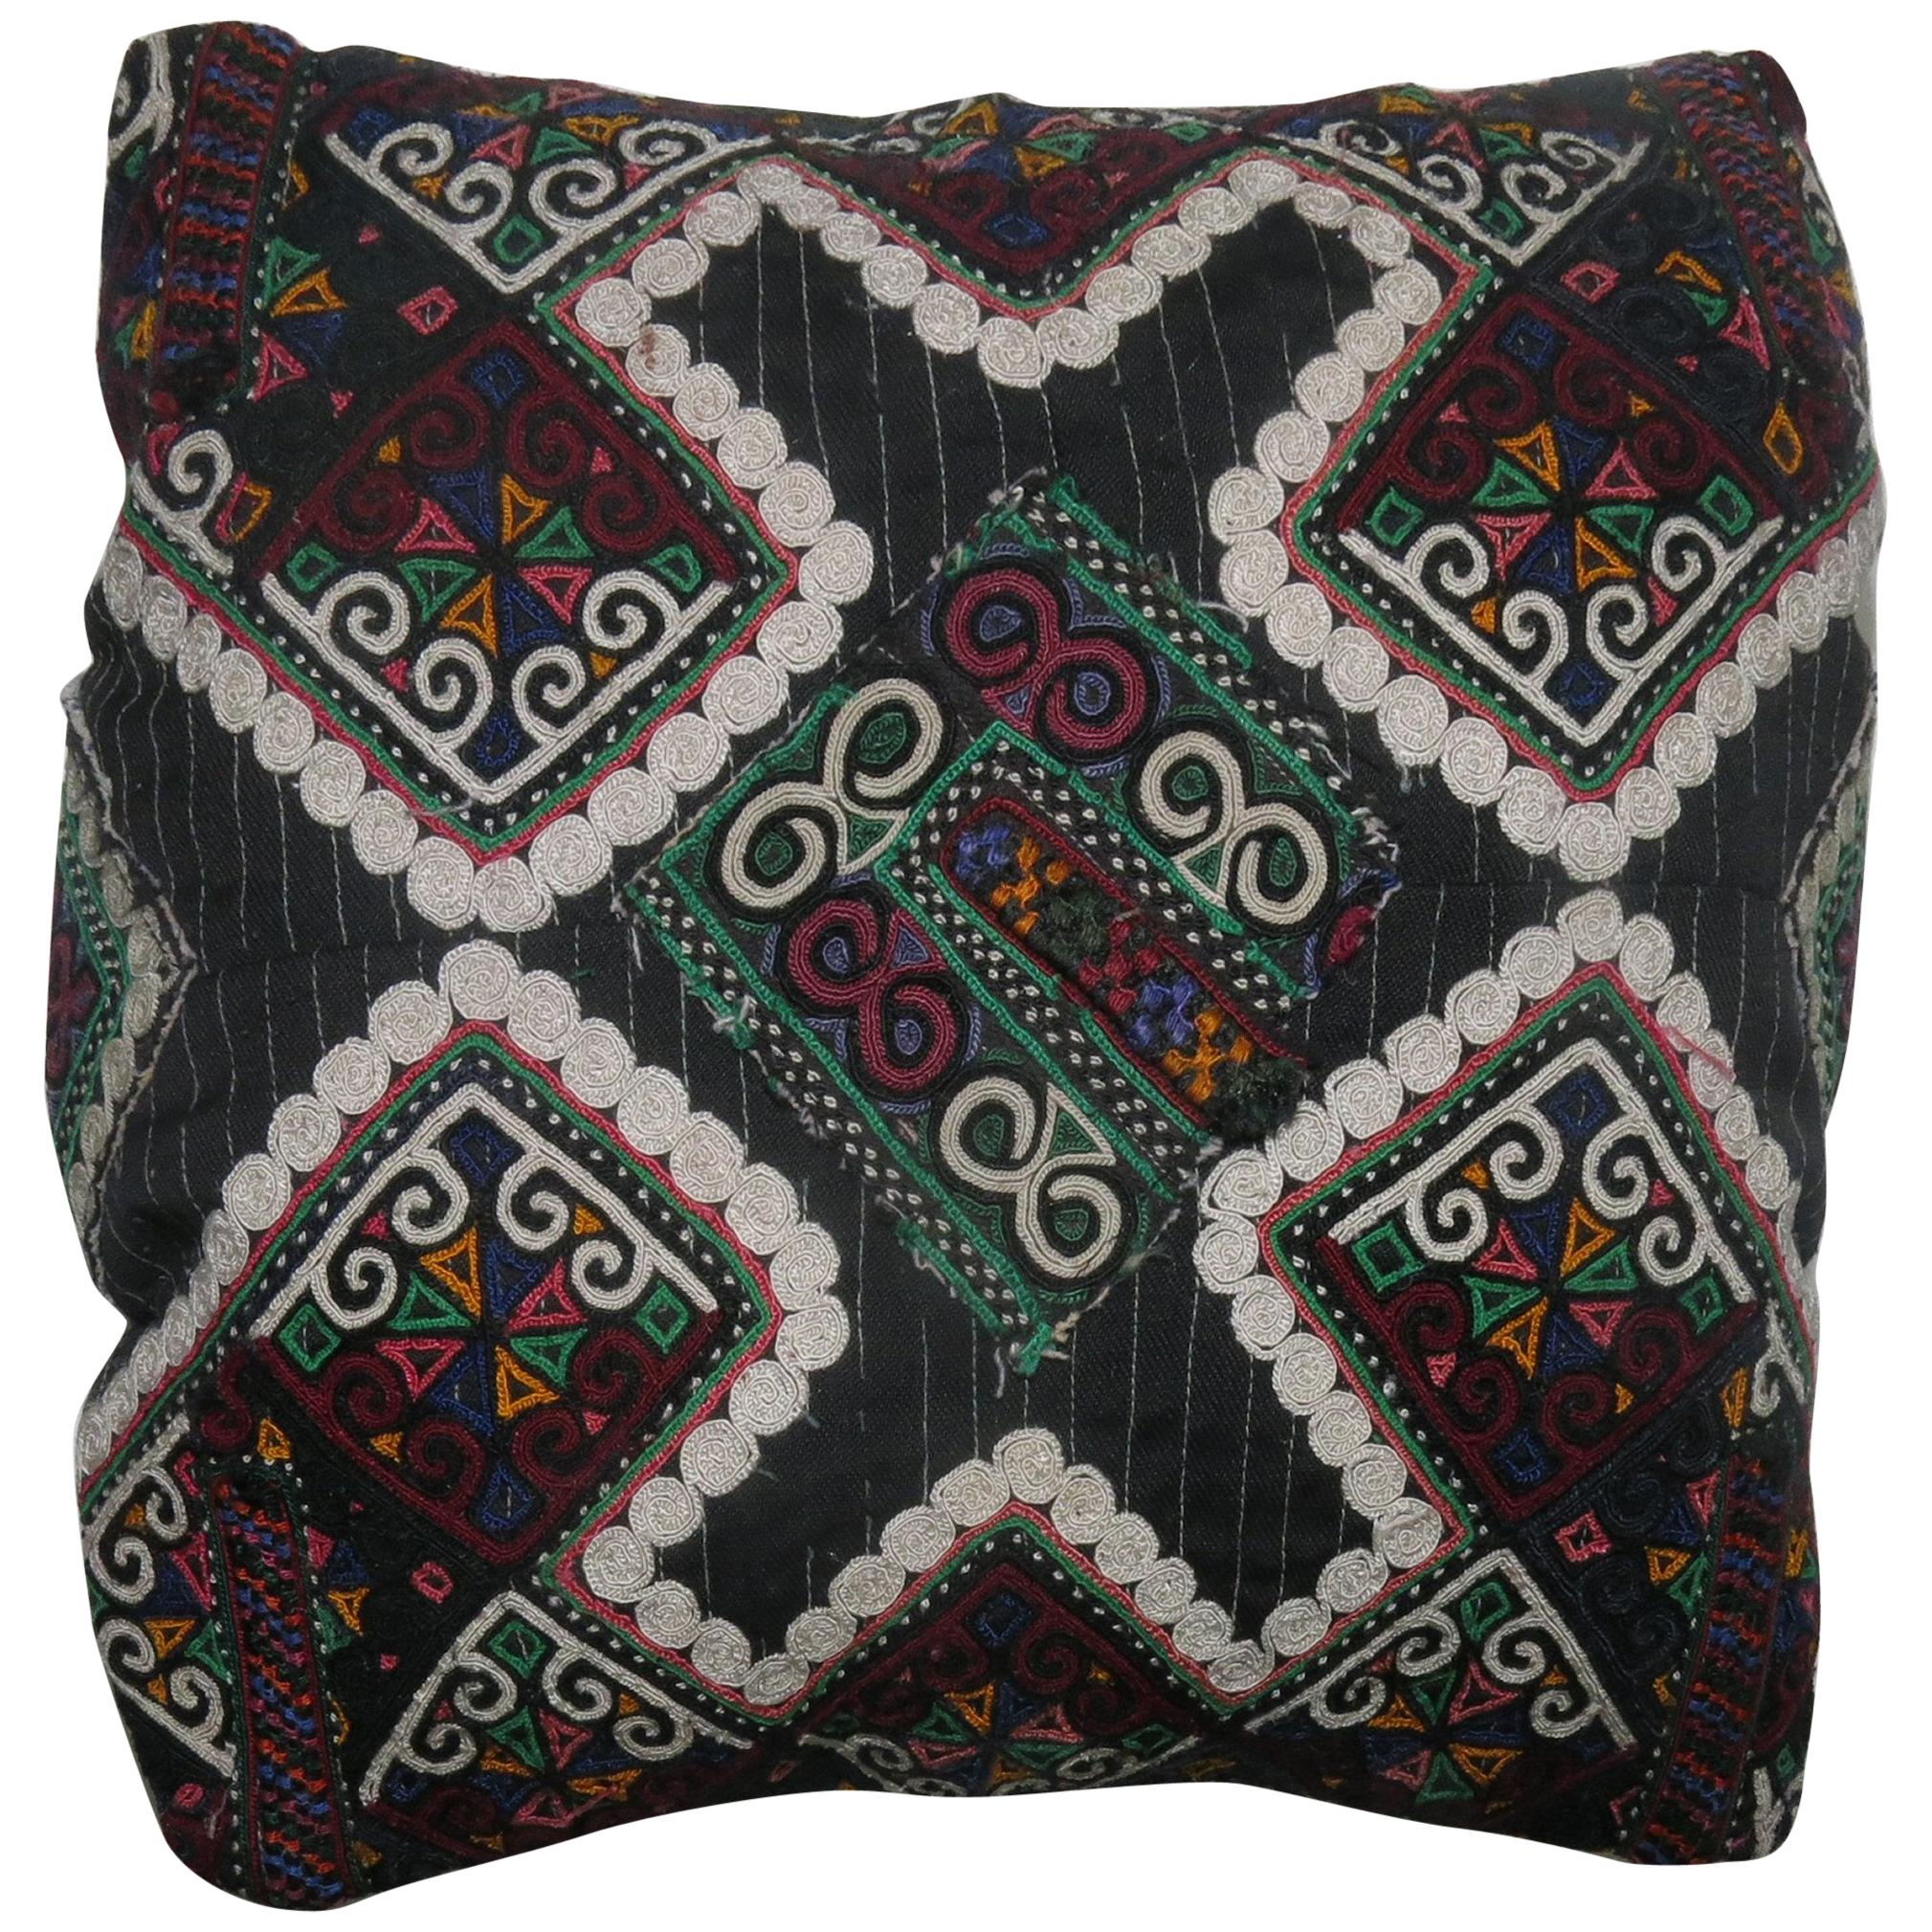 Embroidered Suzanni Textile Pillow For Sale